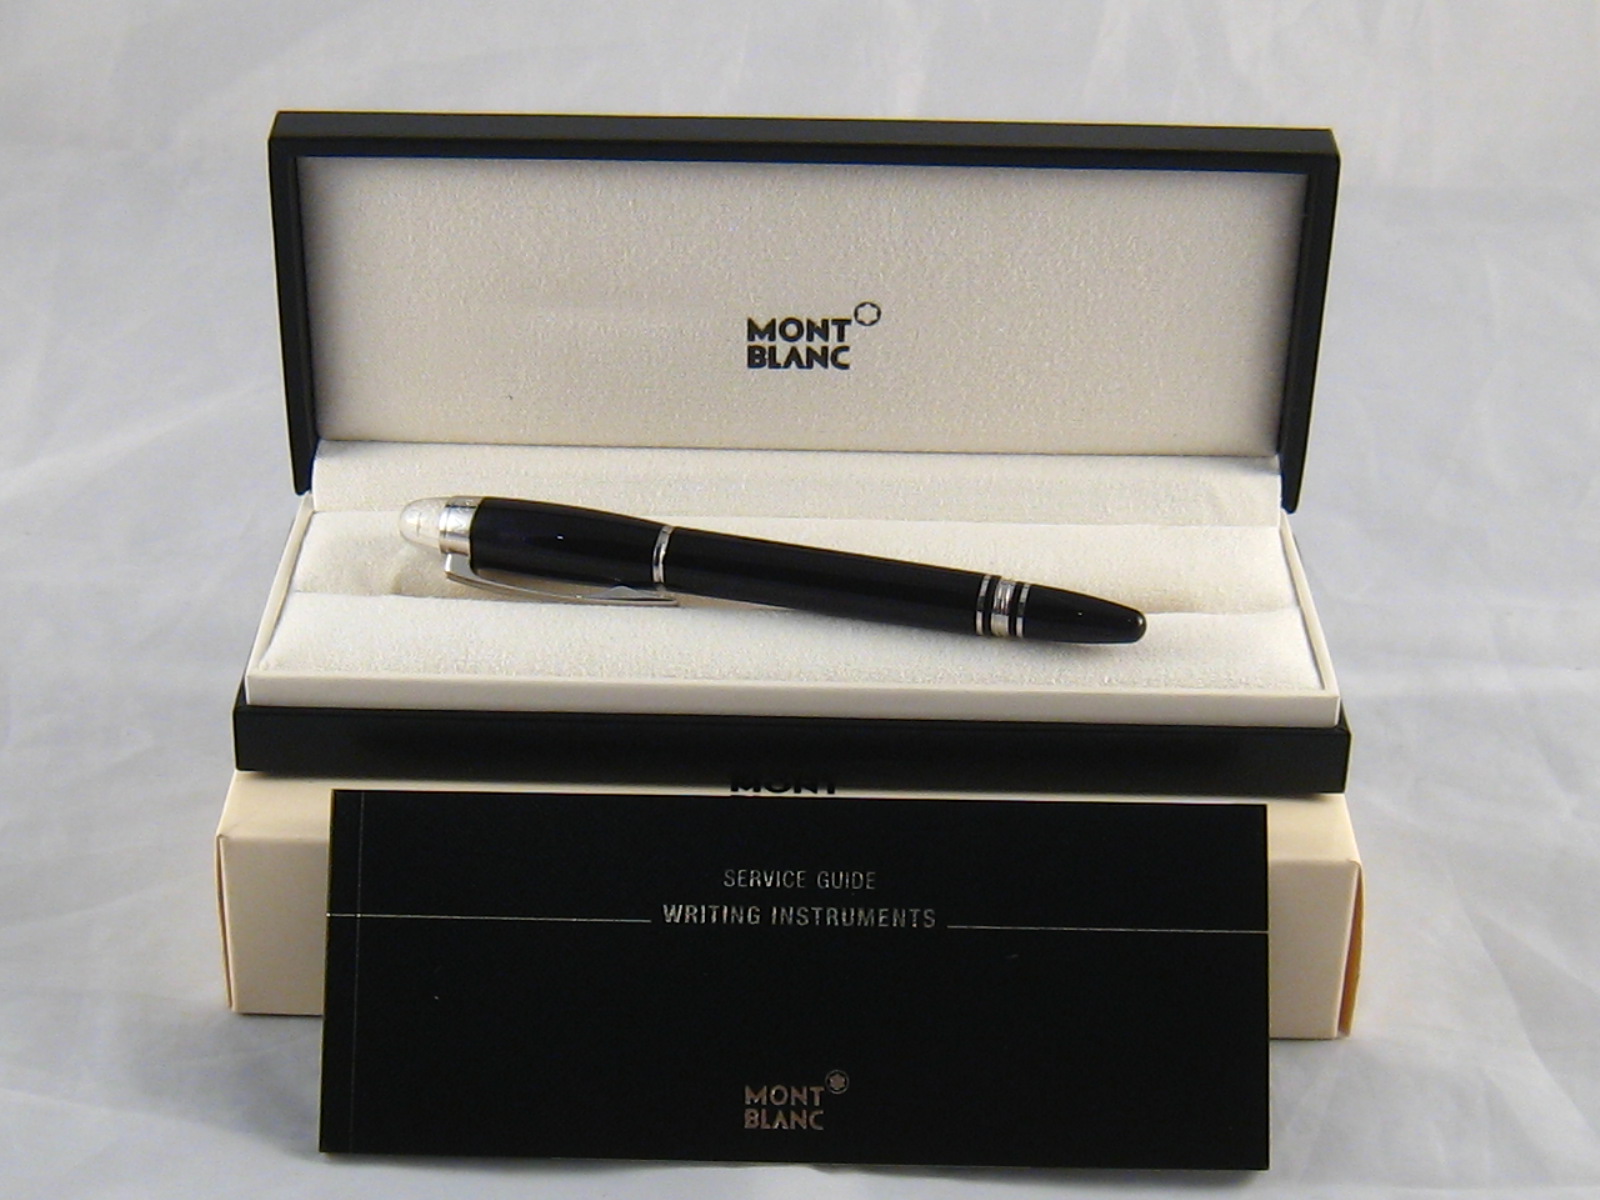 A Mont Blanc Starwalker ballpoint pen in presentation case with service guide and original box.